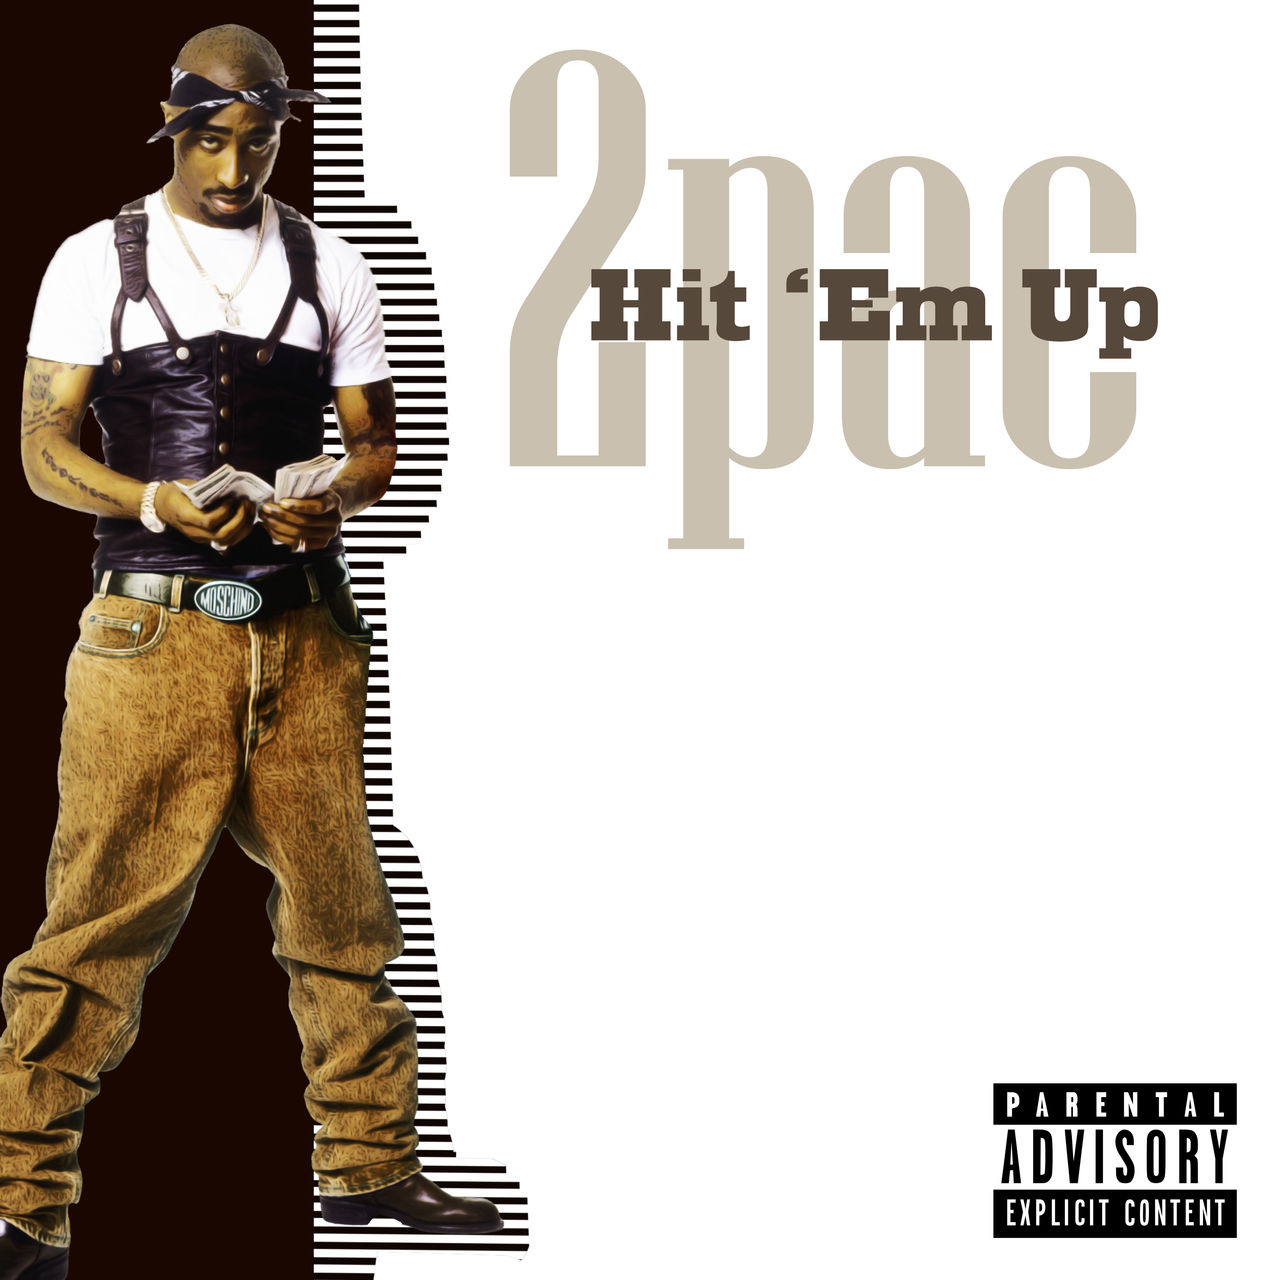 2Pac - Hit Up Fan Cover REMAKE (3500x3500) by on DeviantArt